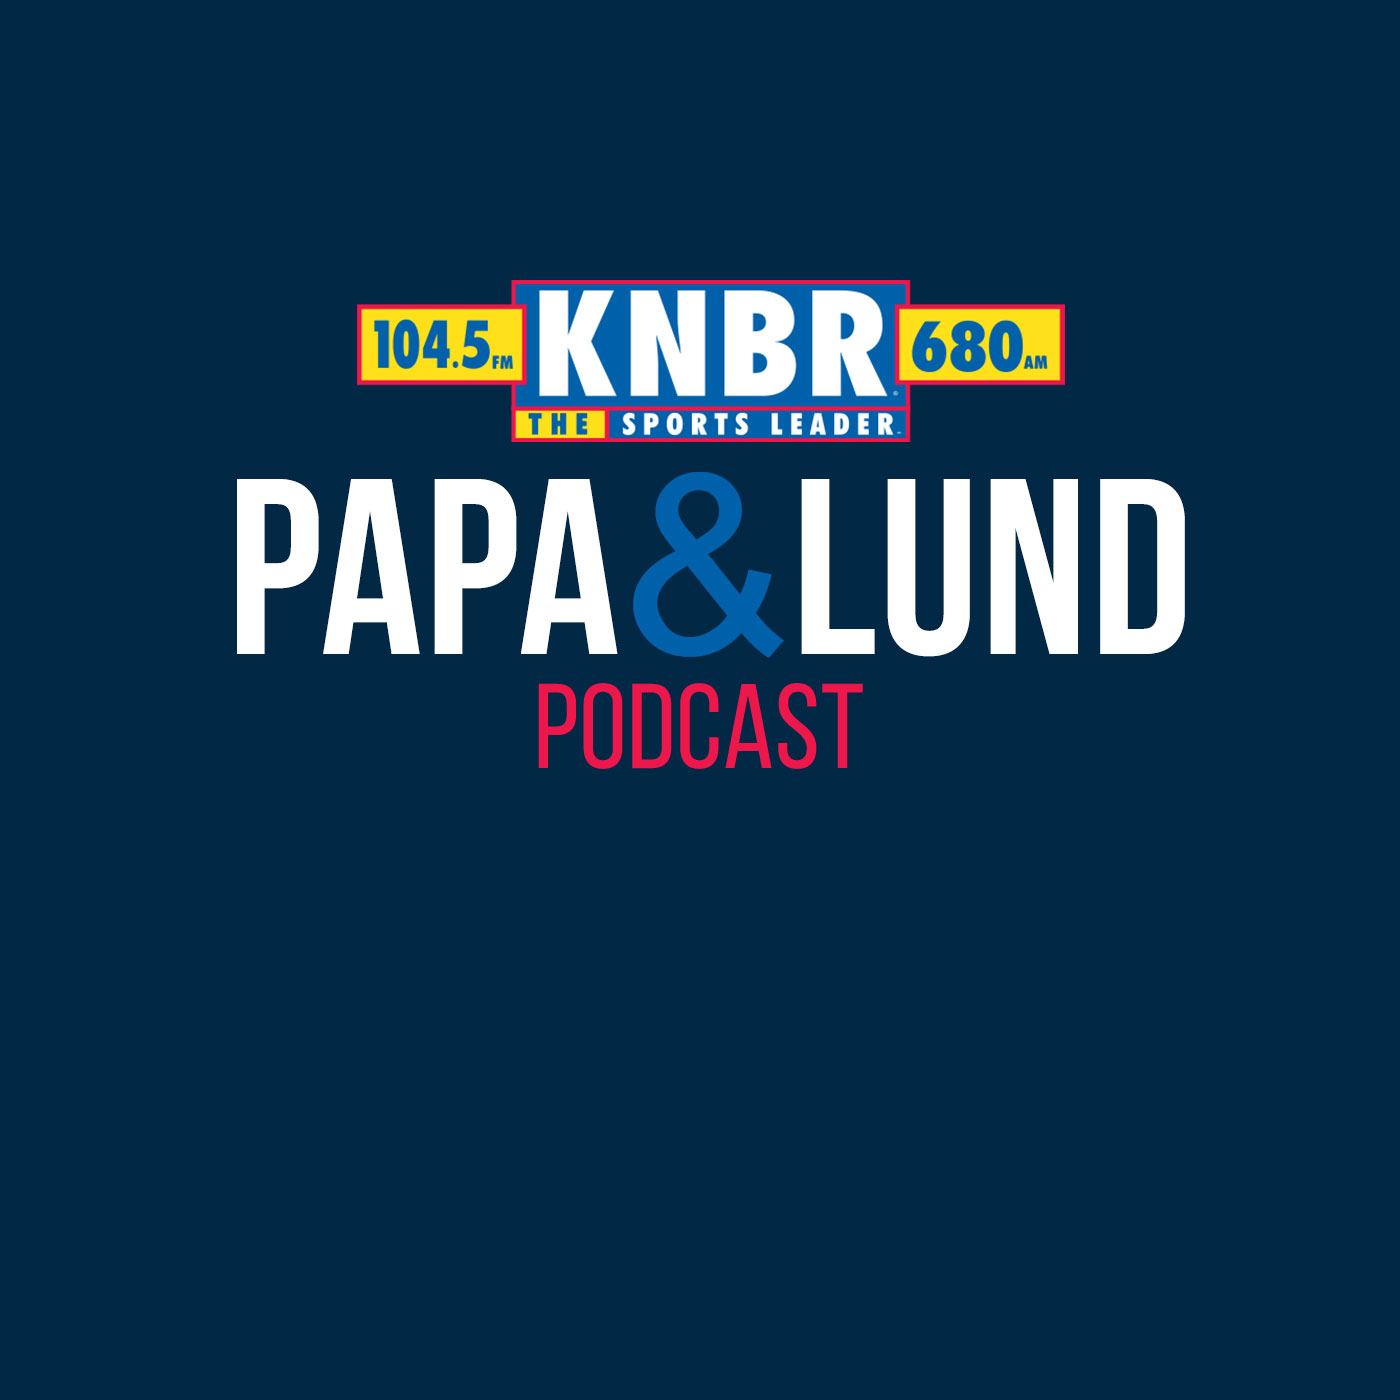 5-23 Shawn Estes joins Papa & Lund to discuss the team figuring things out, Conforto's bat staying hot, as well as all the delicious food options in Minnesota